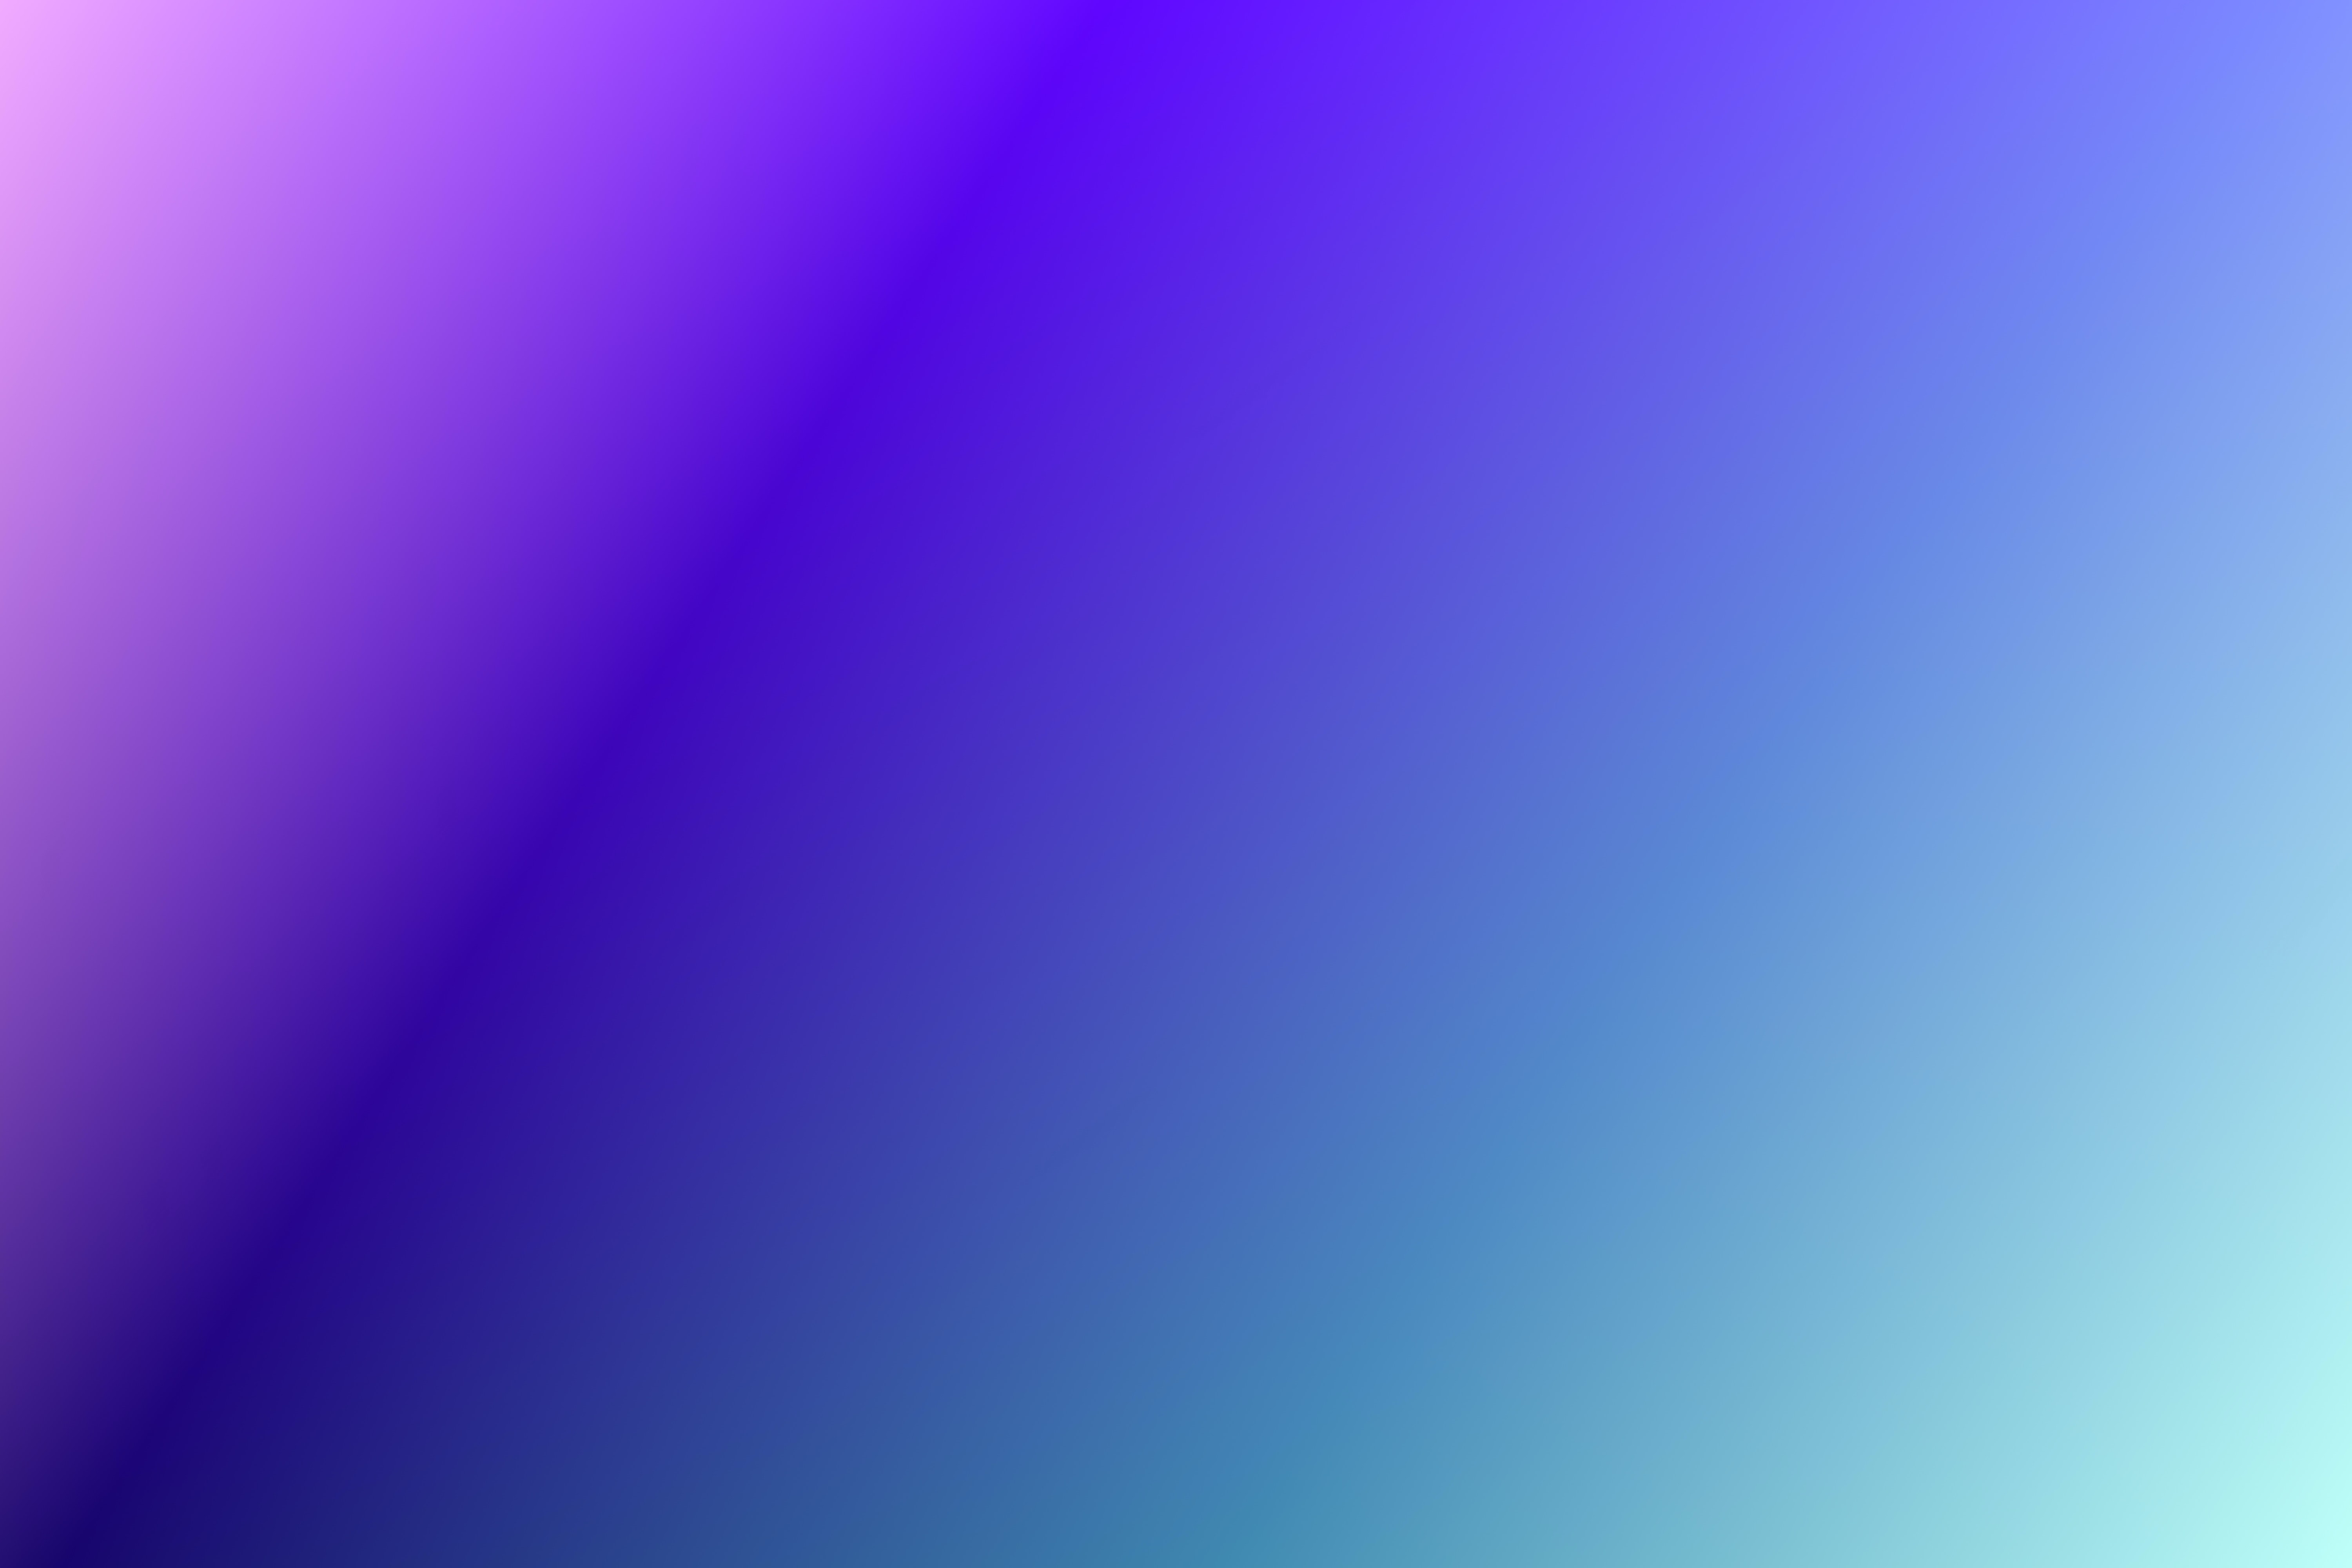 67423 download wallpaper gradient, abstract, violet, blue, purple screensavers and pictures for free